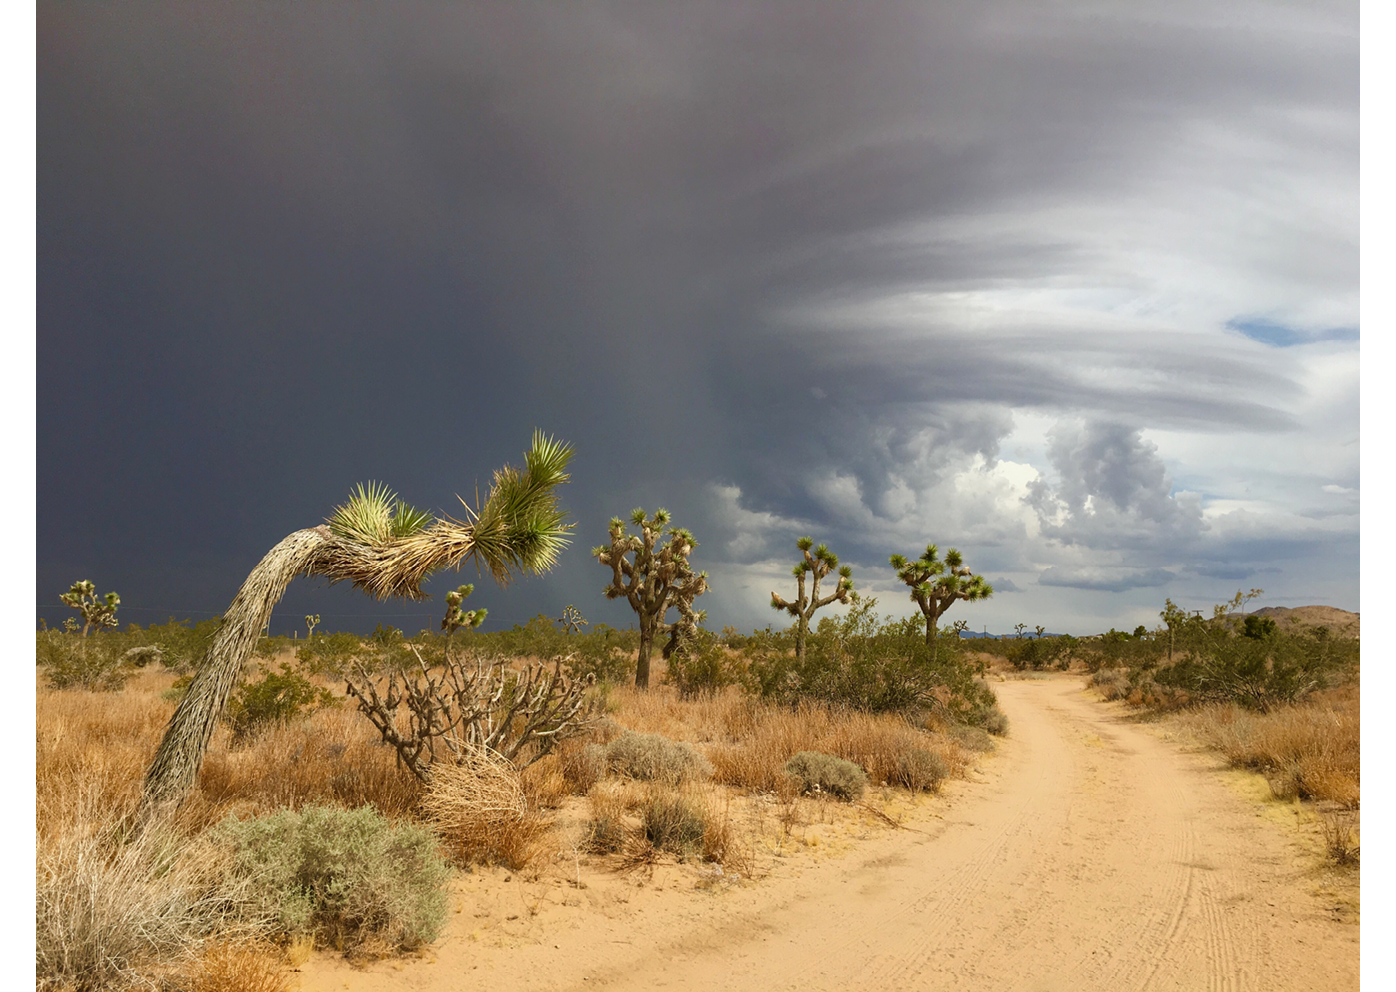 A desert trail, lined with Joshua trees, on a cloudy, stormy day.